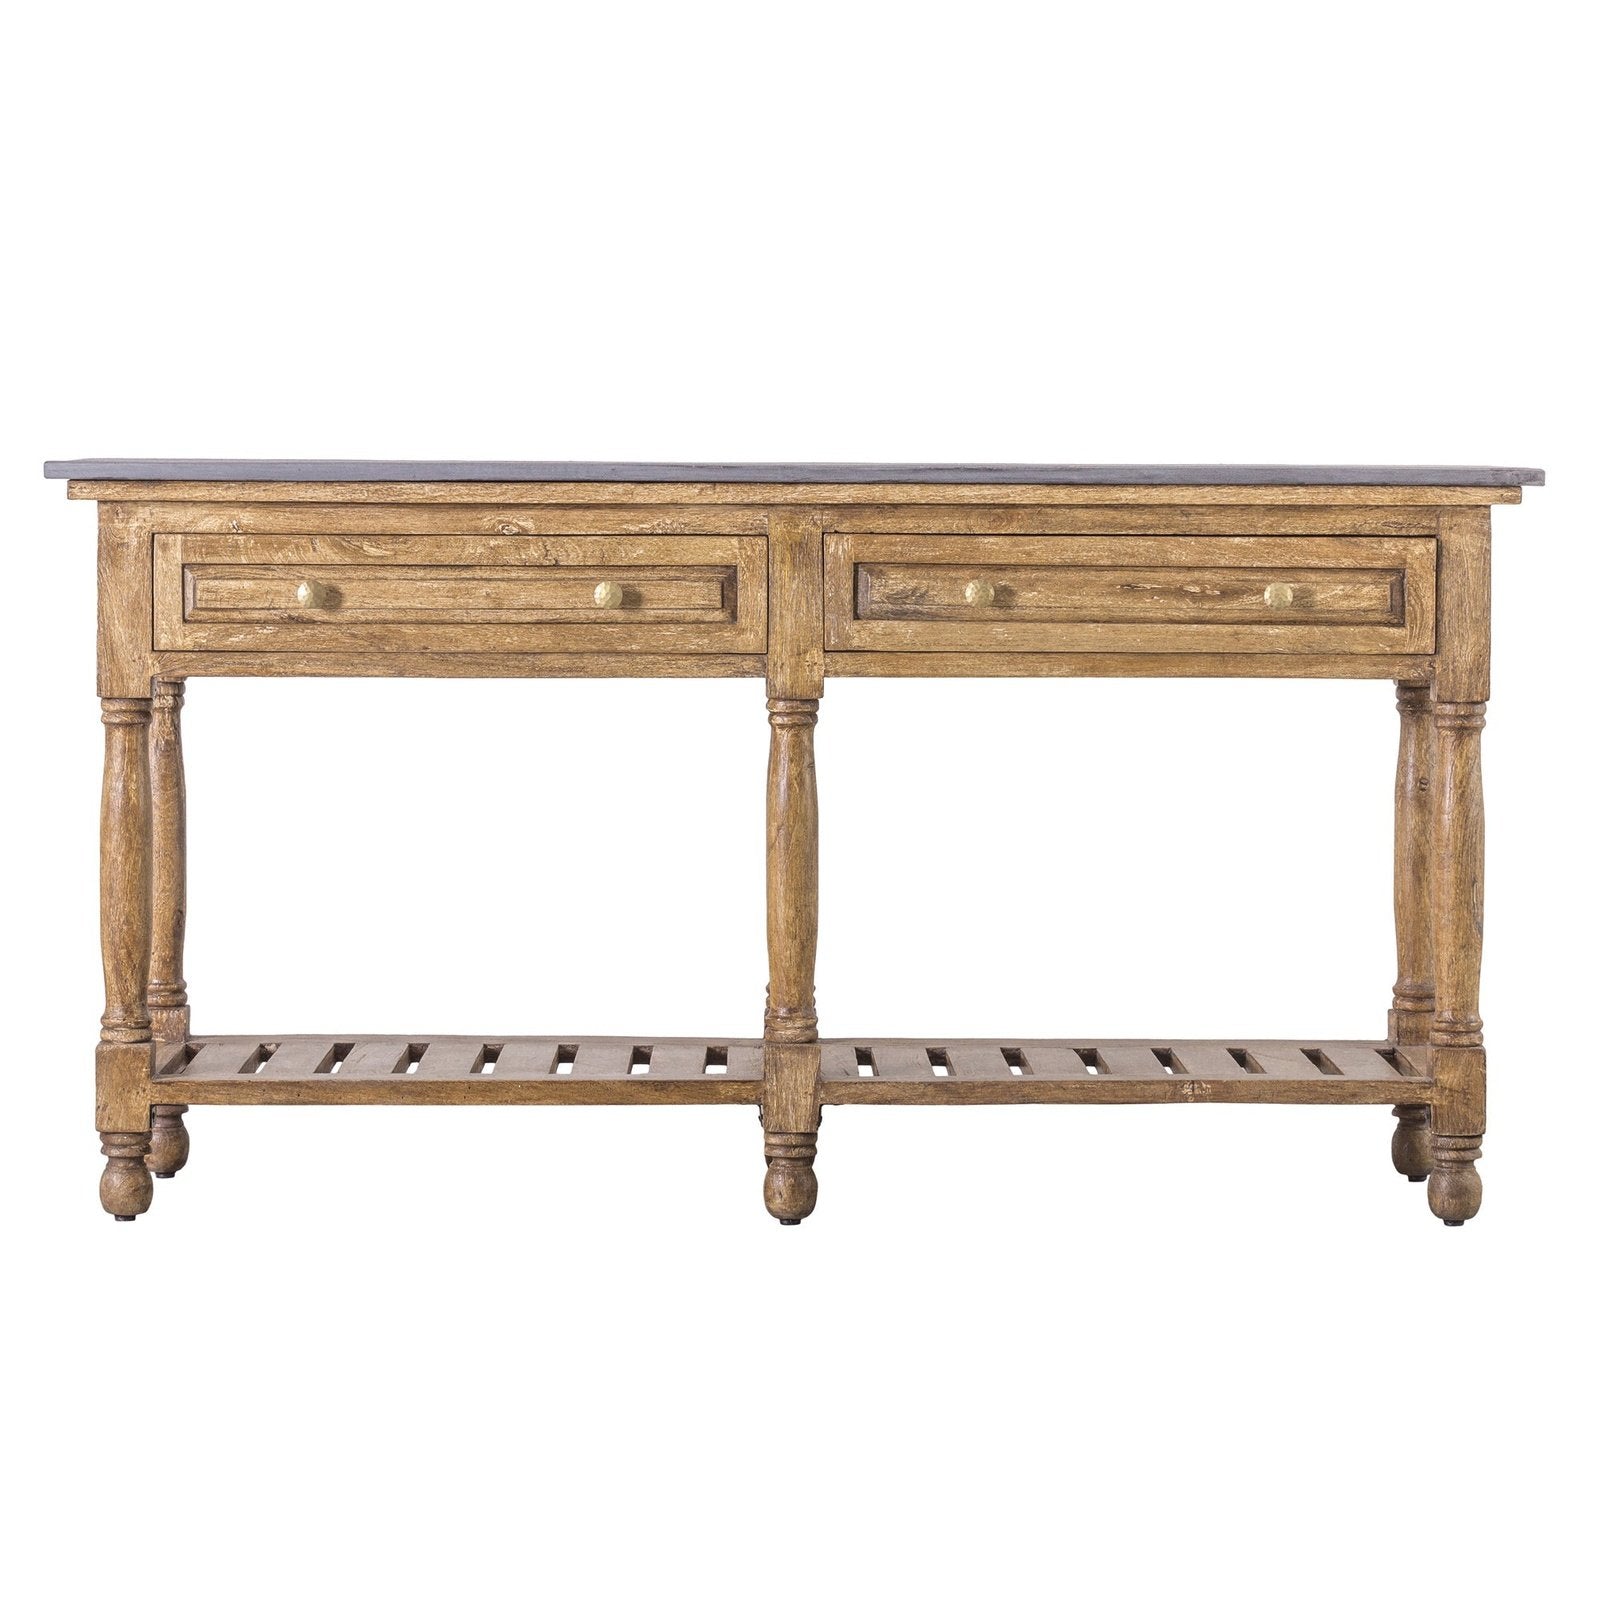 Tudor 2 Drawer Console - Marble Tabletop - Low Slatted Shelf